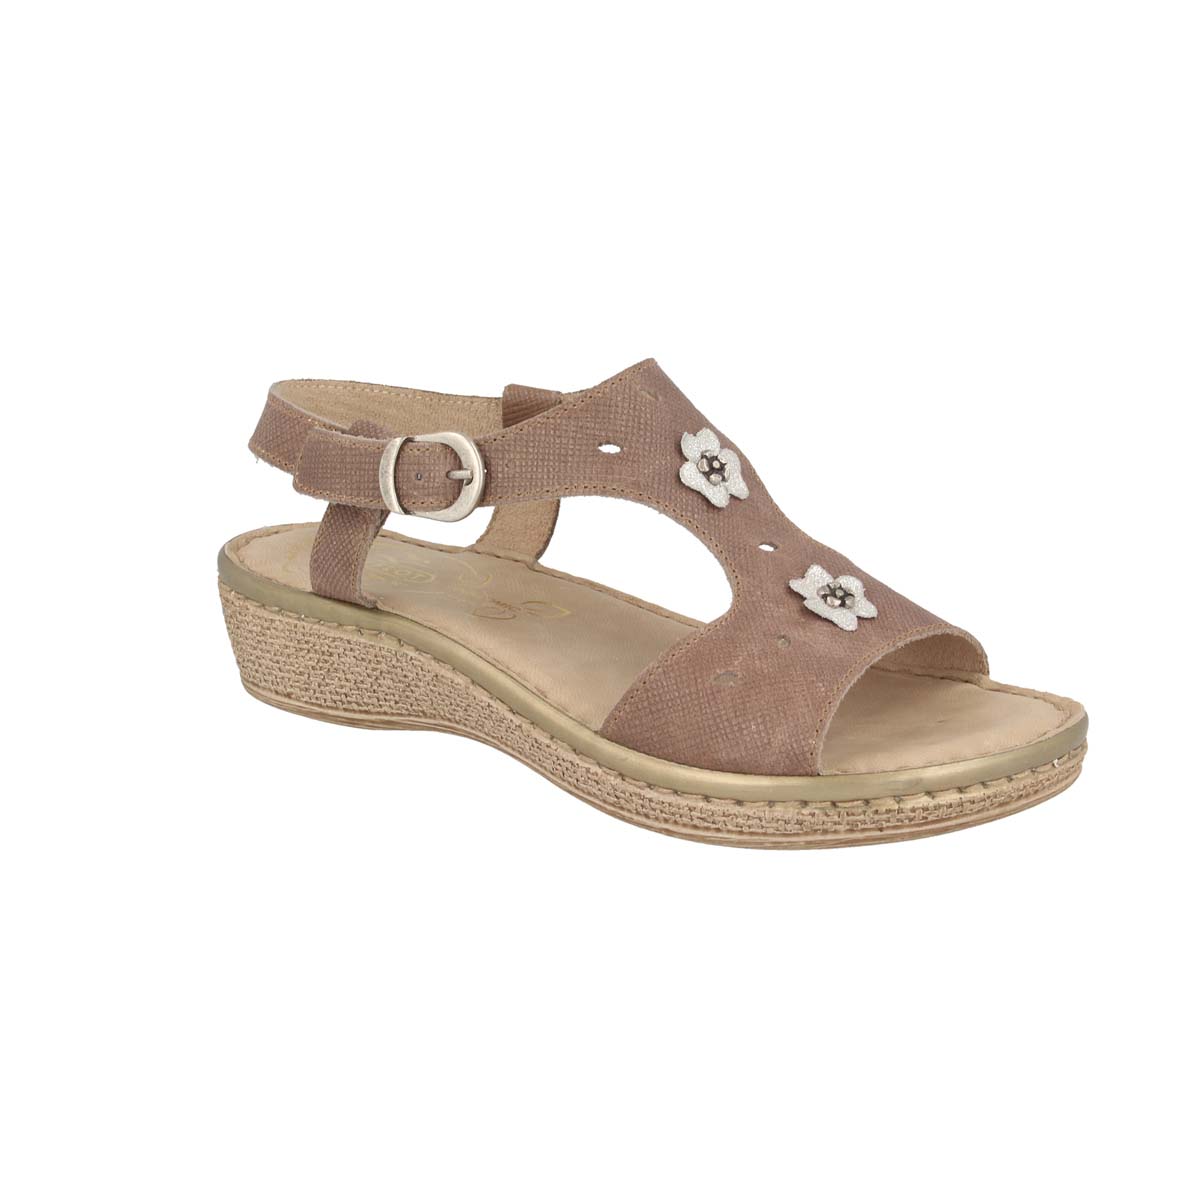 See photos Leather Woman Sandal Taupe (210868G)